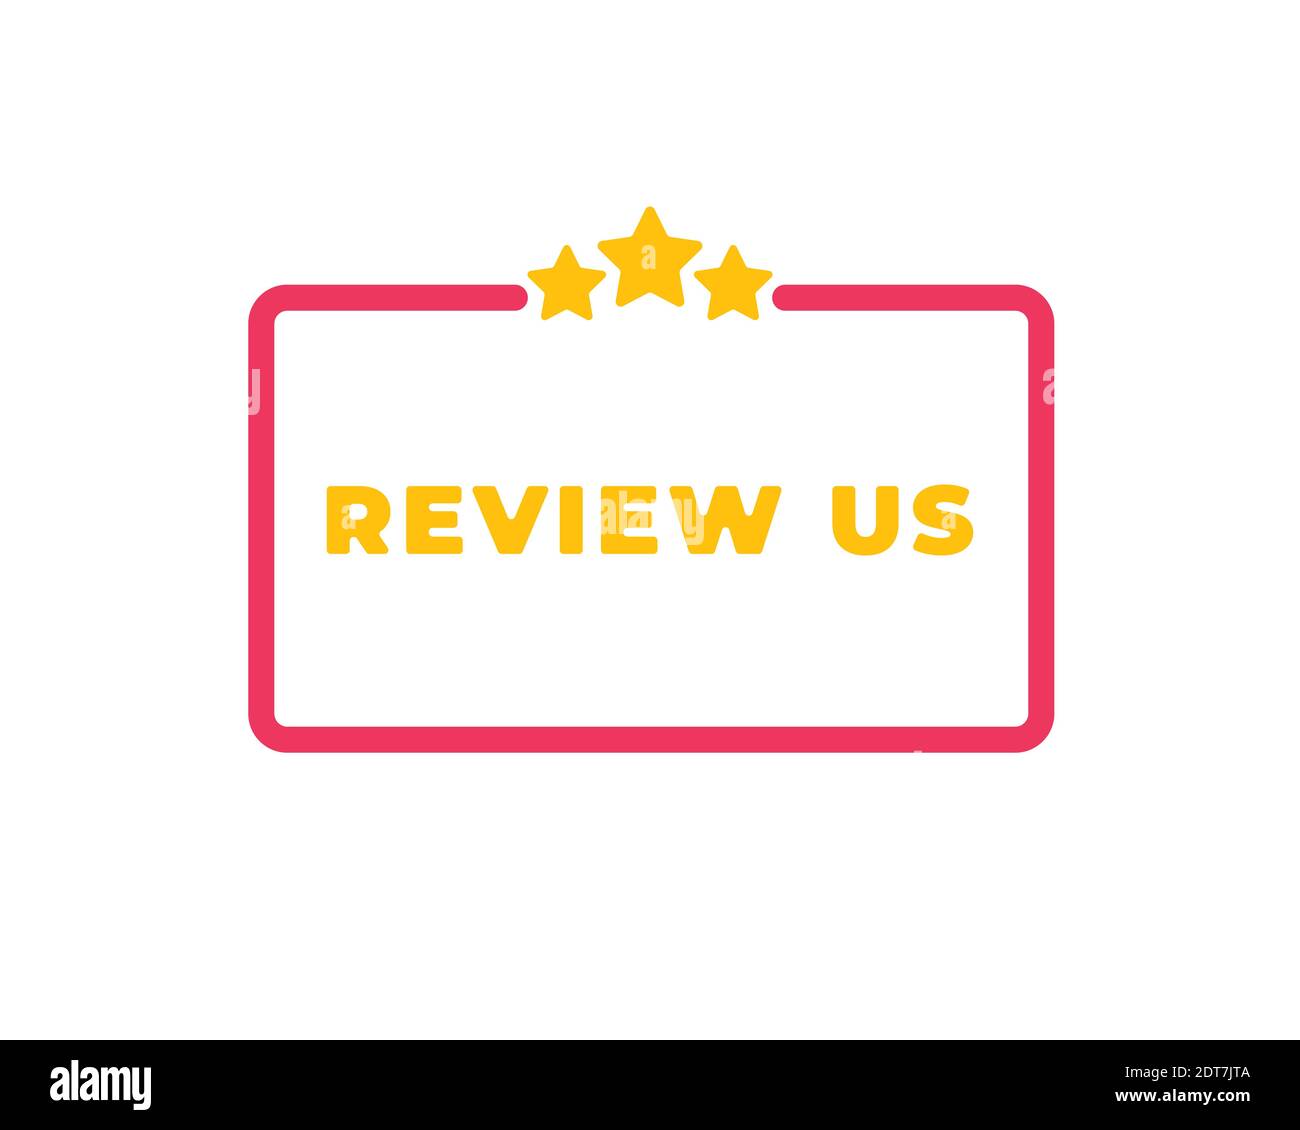 User rating concept. Review and rate us stars. Business concept for social media. vector illustration. Stock Vector